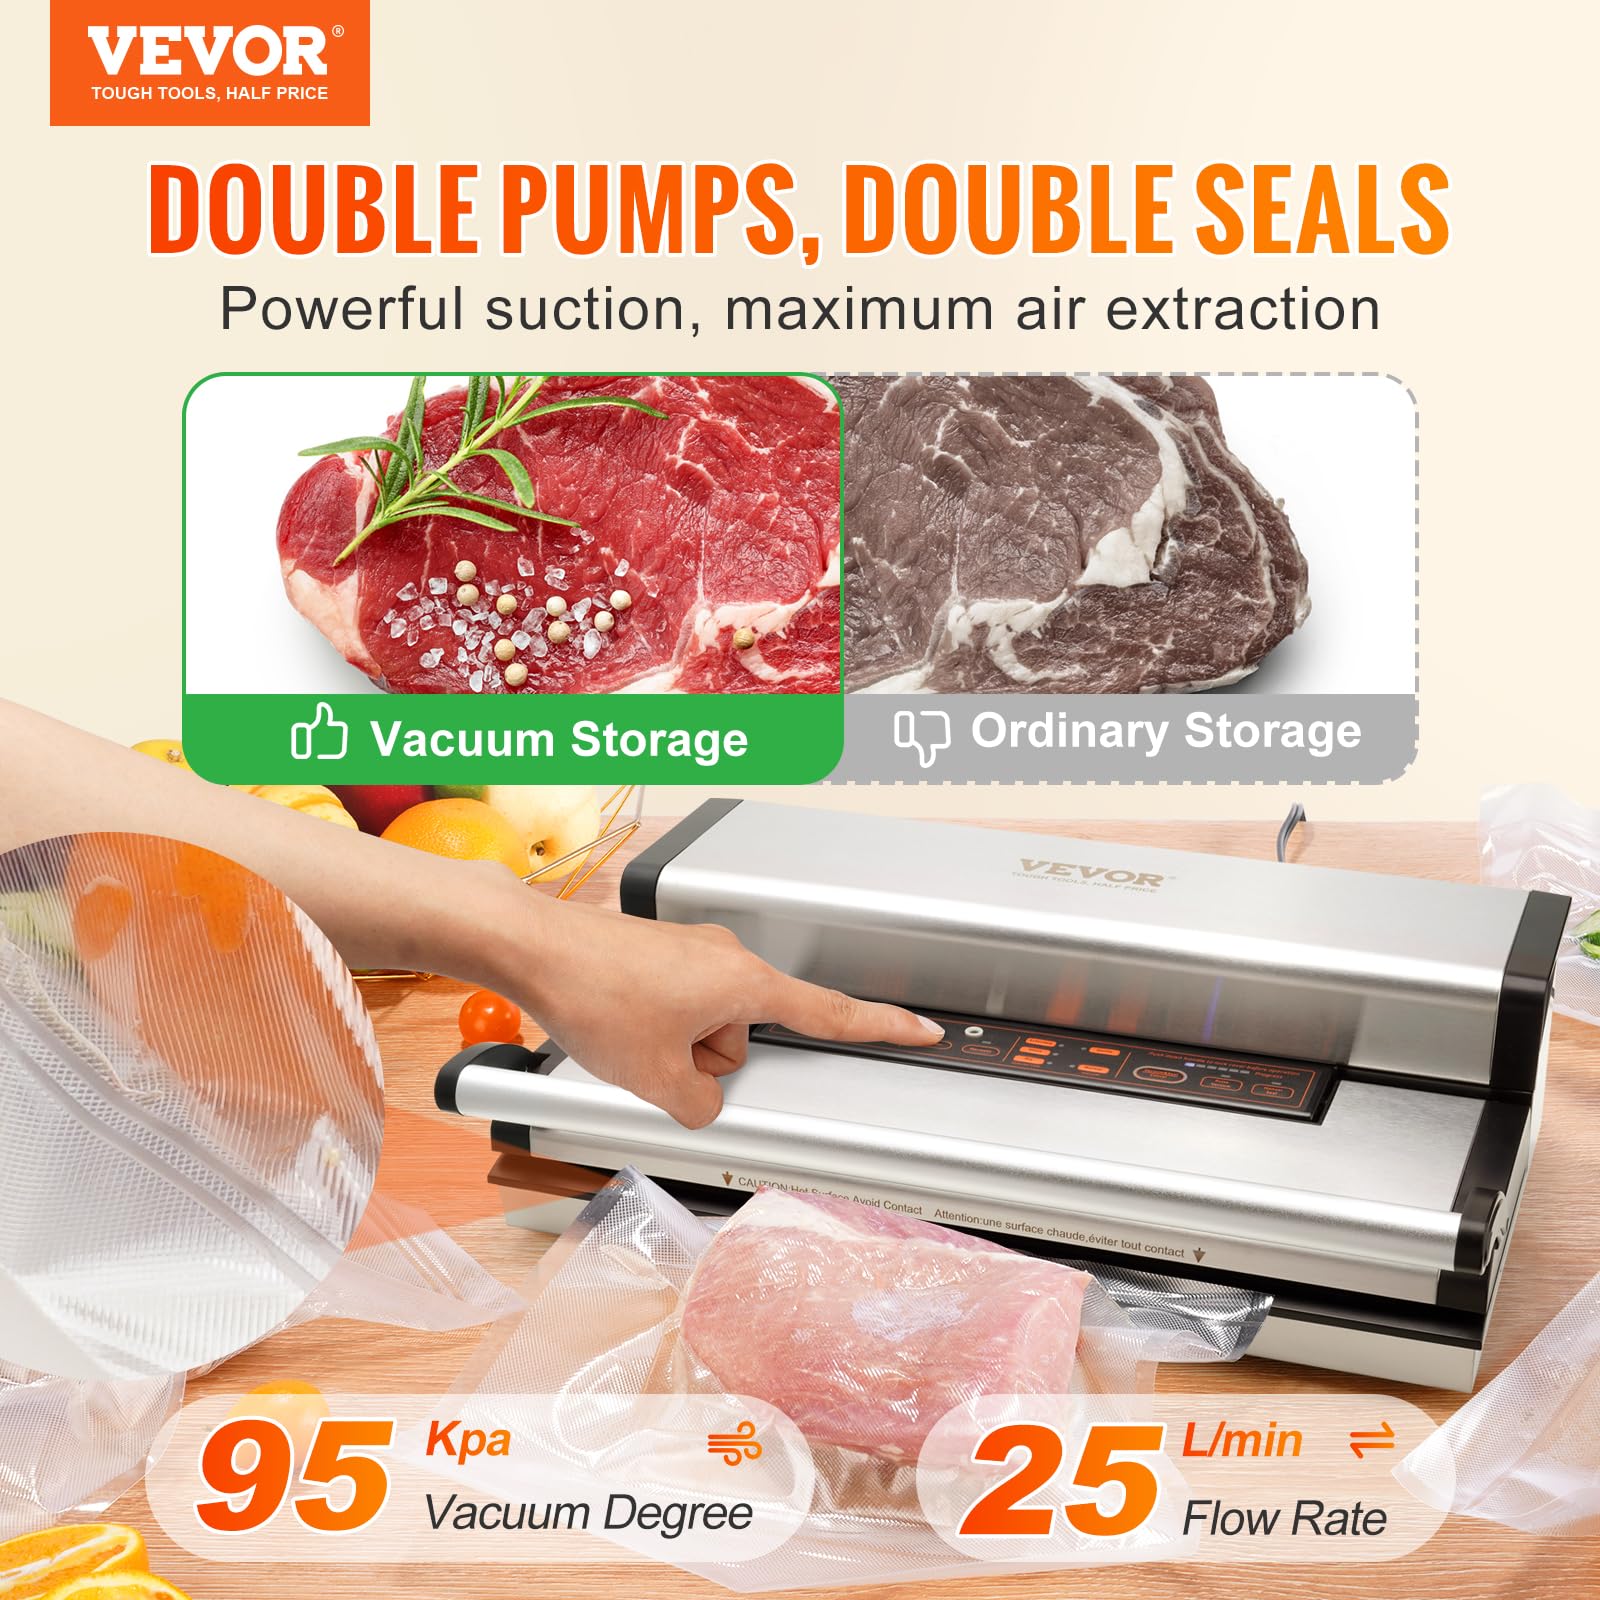 VEVOR Food Vacuum Sealer Machine, 95Kpa 350W Powerful Dual Pump and Dual Sealing, Dry and Moist Food Storage, Automatic and Manual Air Sealing System with Built-in Cutter, with Seal Bag External Hose